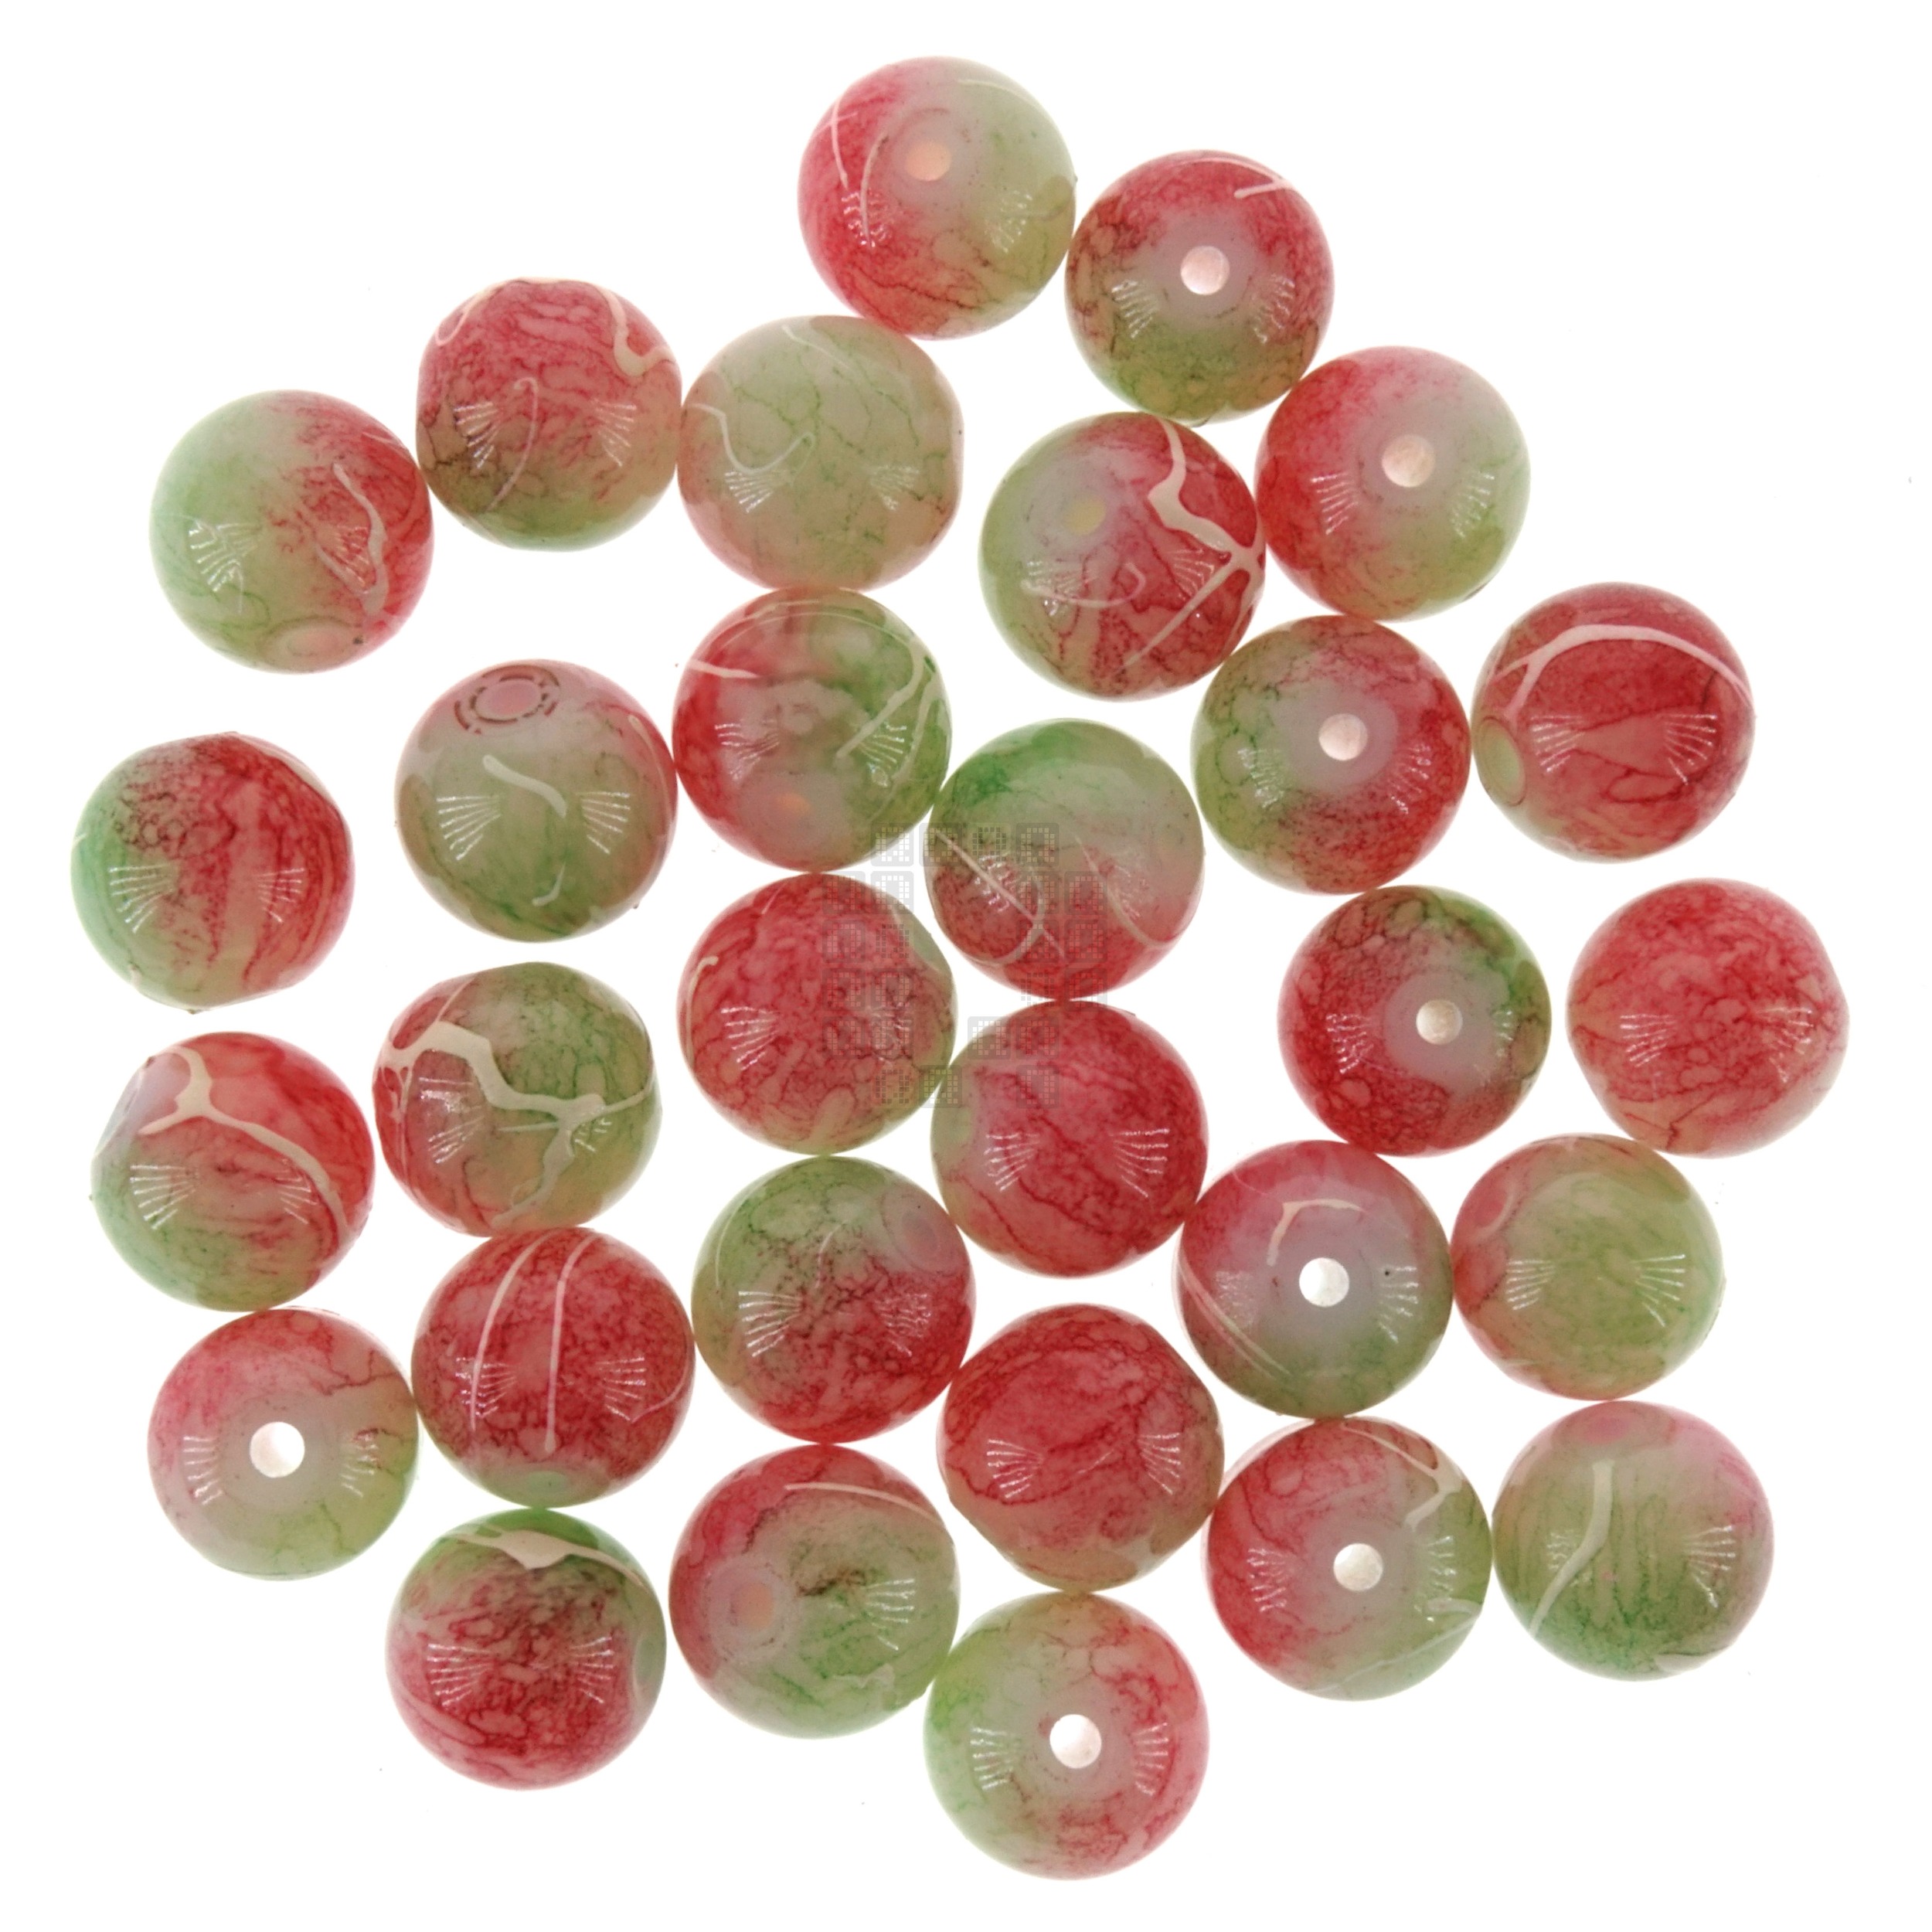 Watermelon 8mm Loose Glass Beads, 30 Pieces